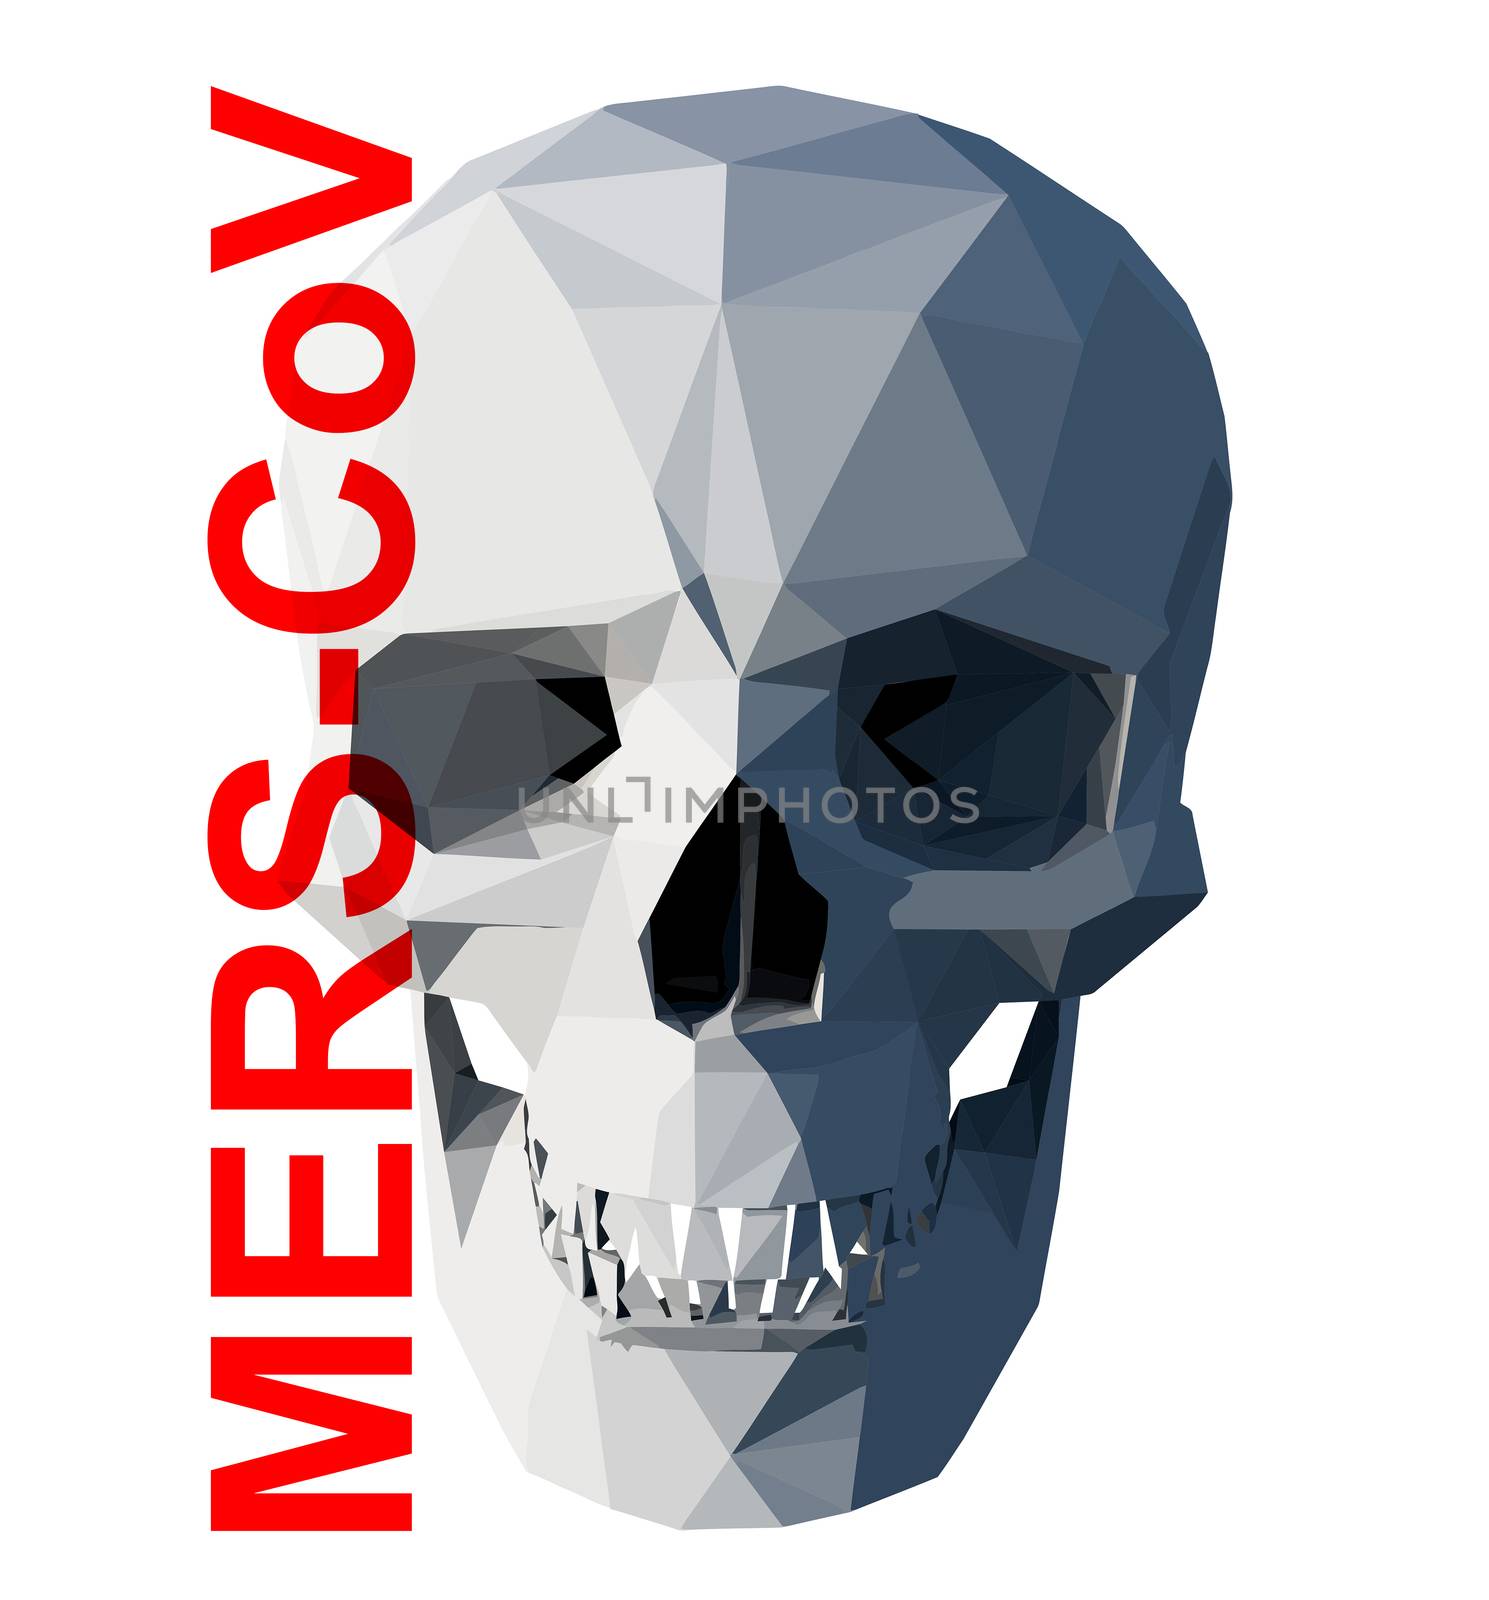 mers-cov virus warning sign. 3d concept